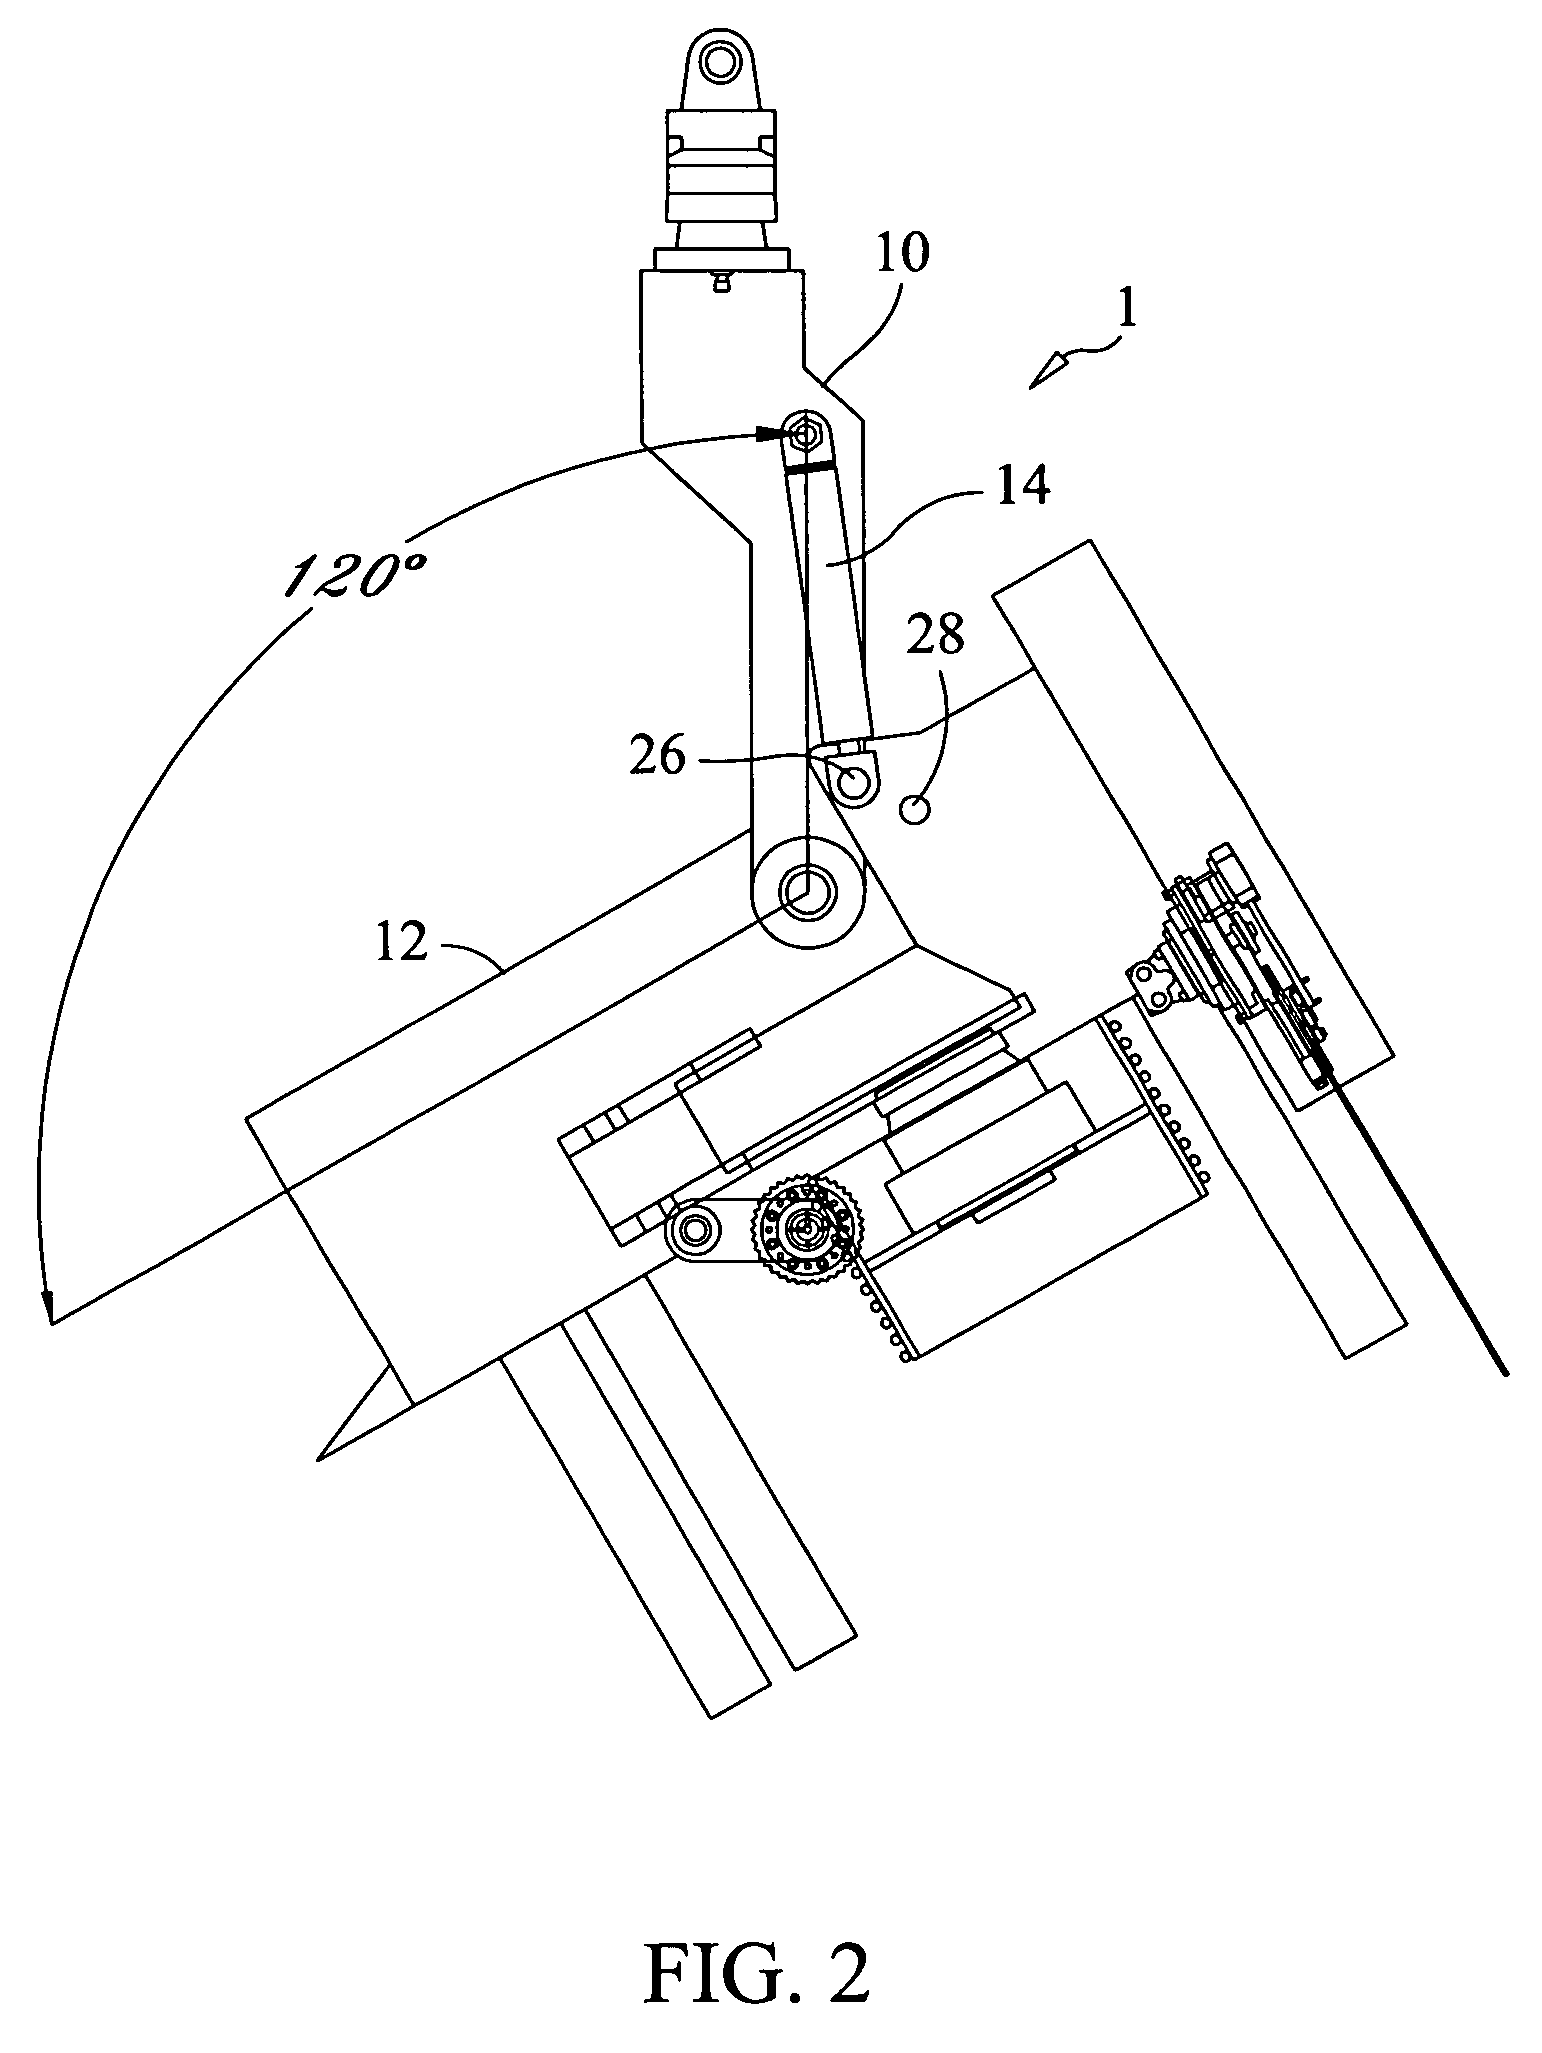 Tree processing equipment with two position pivot point for actuator ends